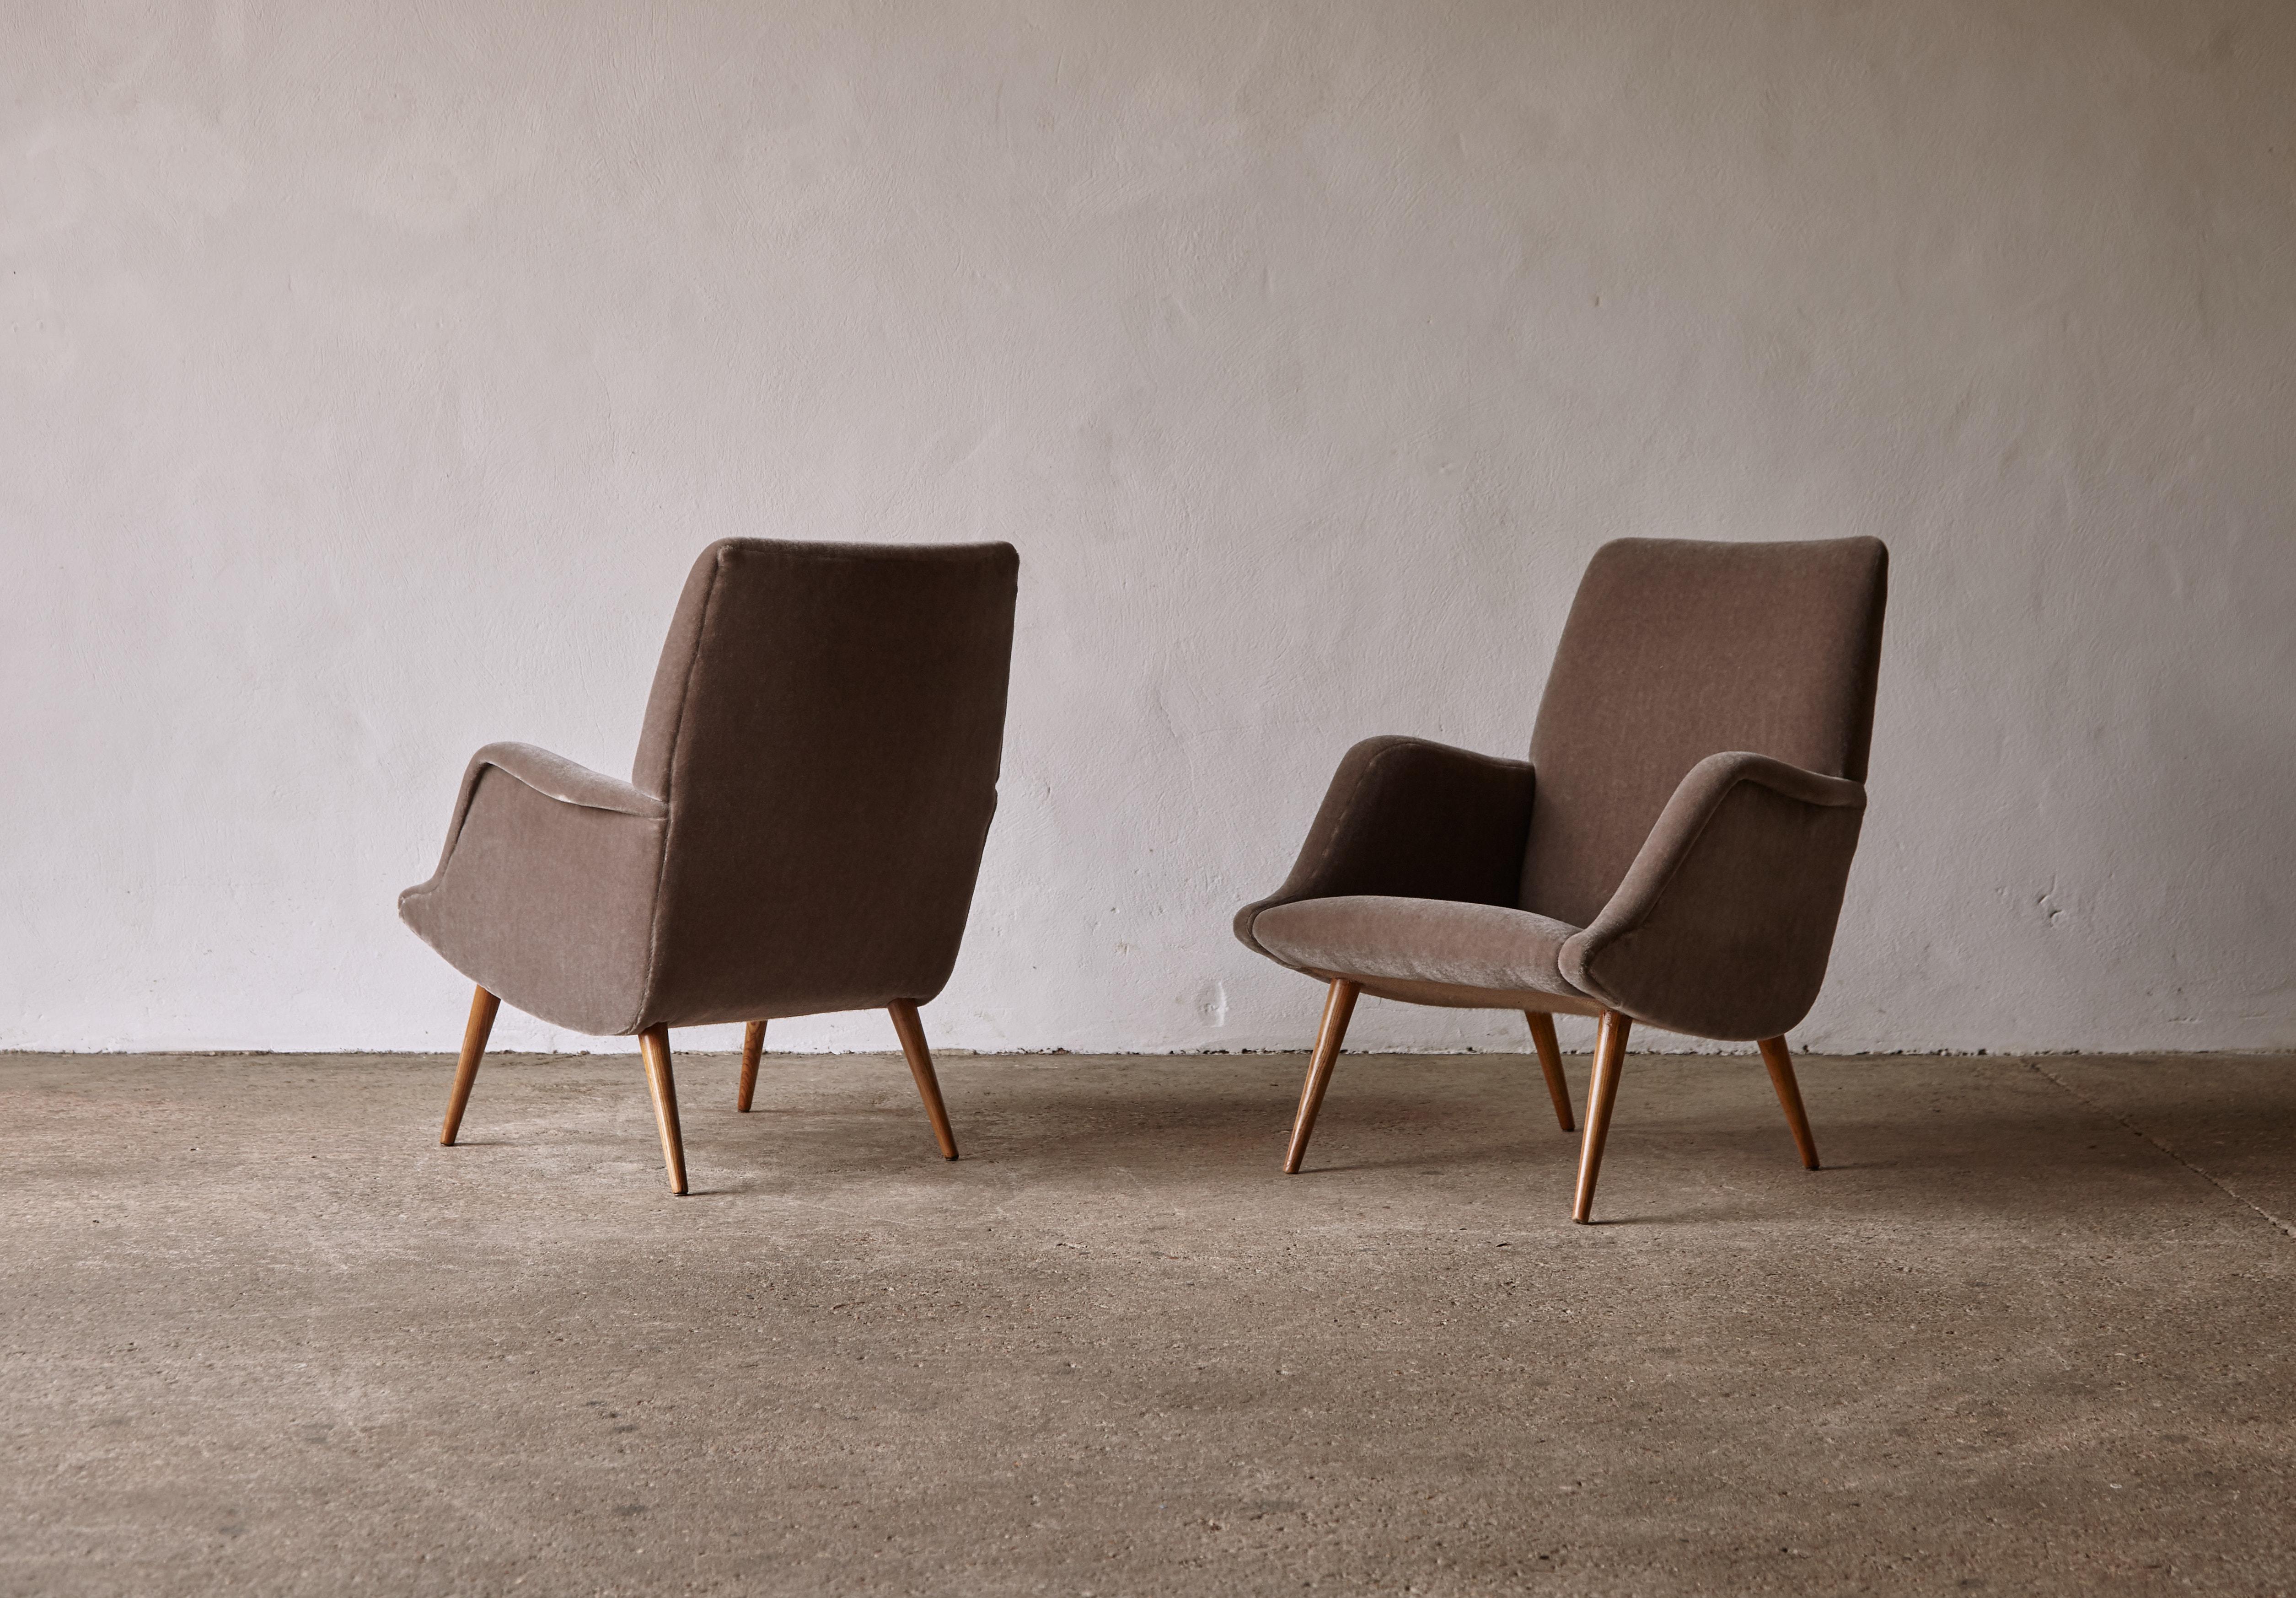 Carlo de Carli Model 806 armchairs, produced by Cassina, Italy, 1950s. Oak legs with dark grey (with a hint of brown) 100% mohair fabric. Fast shipping worldwide.


